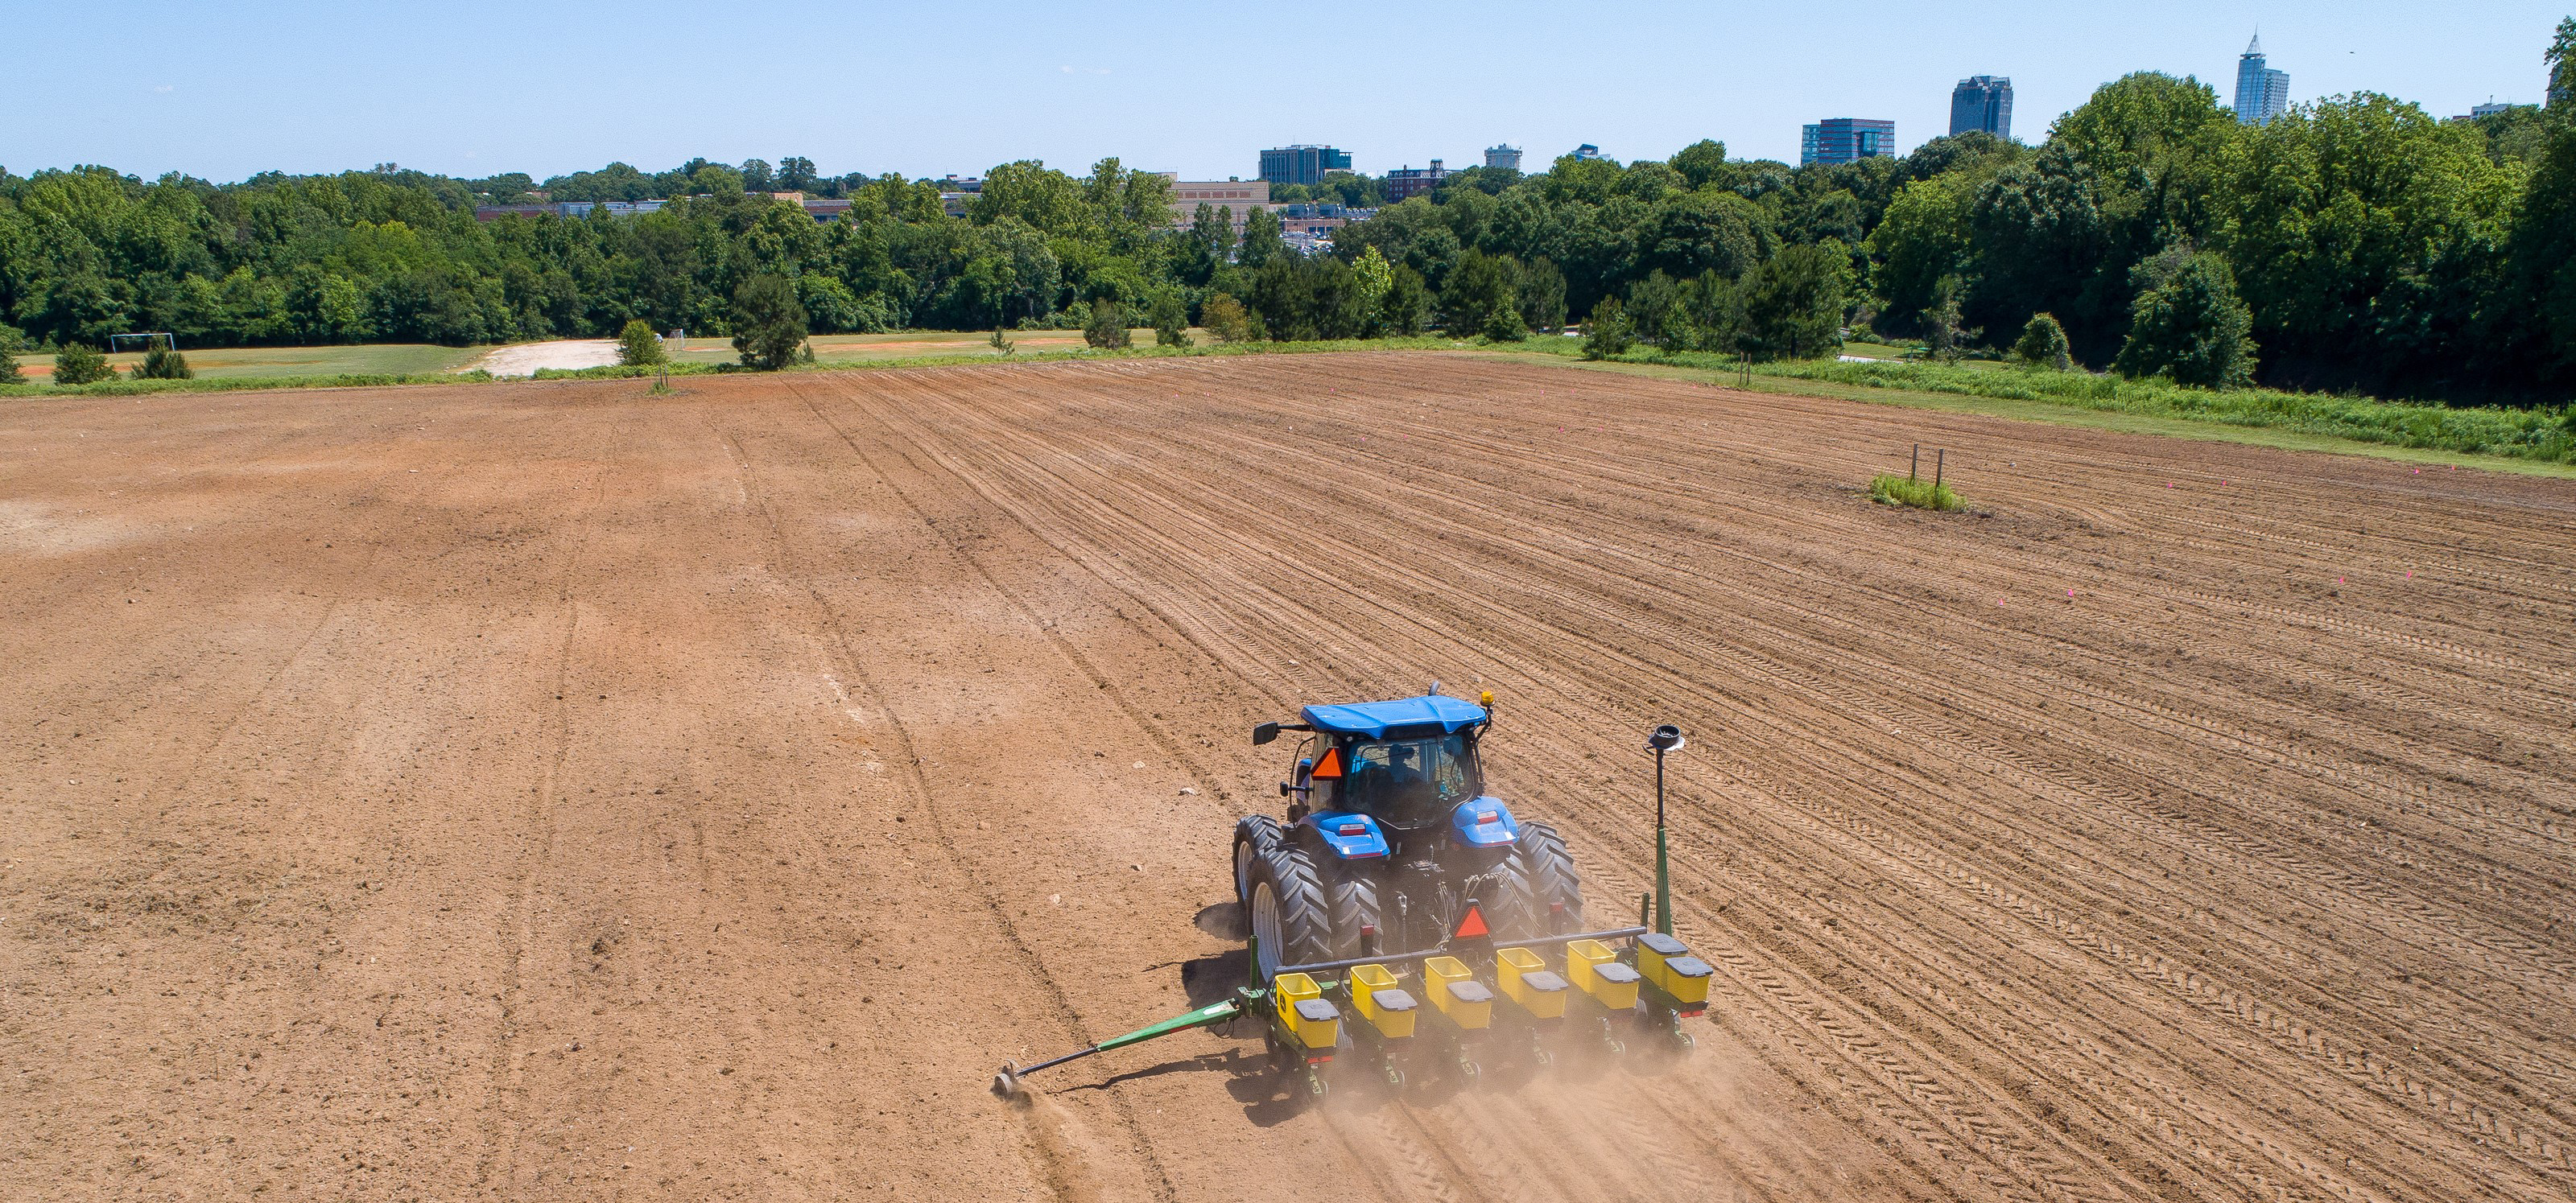 Aerial view of a tractor planting the sunflower field at Dix Park with the city skyline in the distance